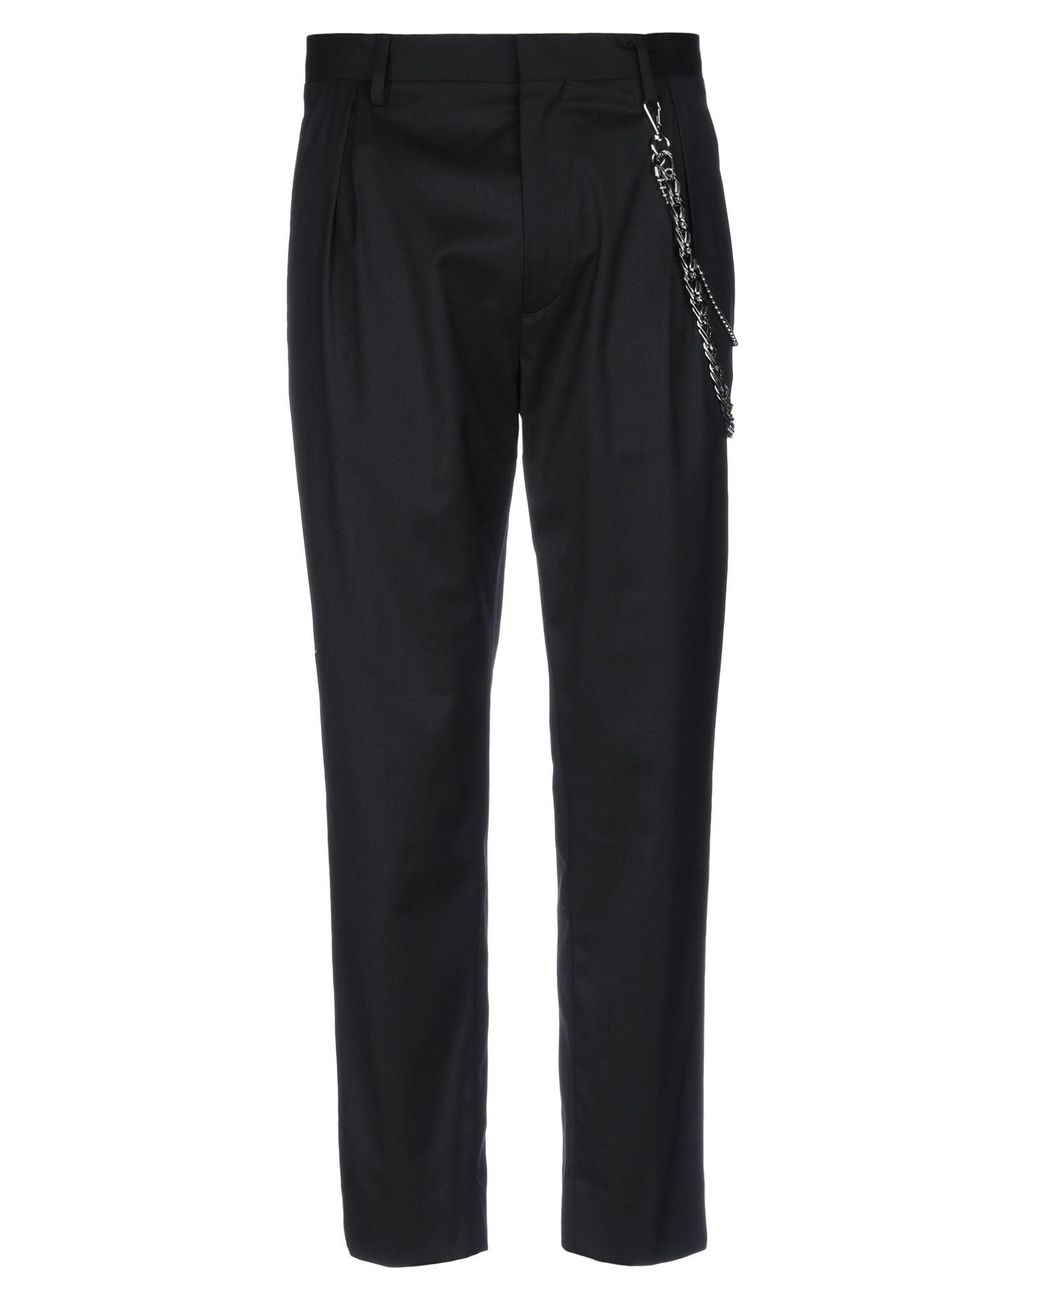 Just Cavalli Synthetic Casual Pants in Black for Men - Lyst